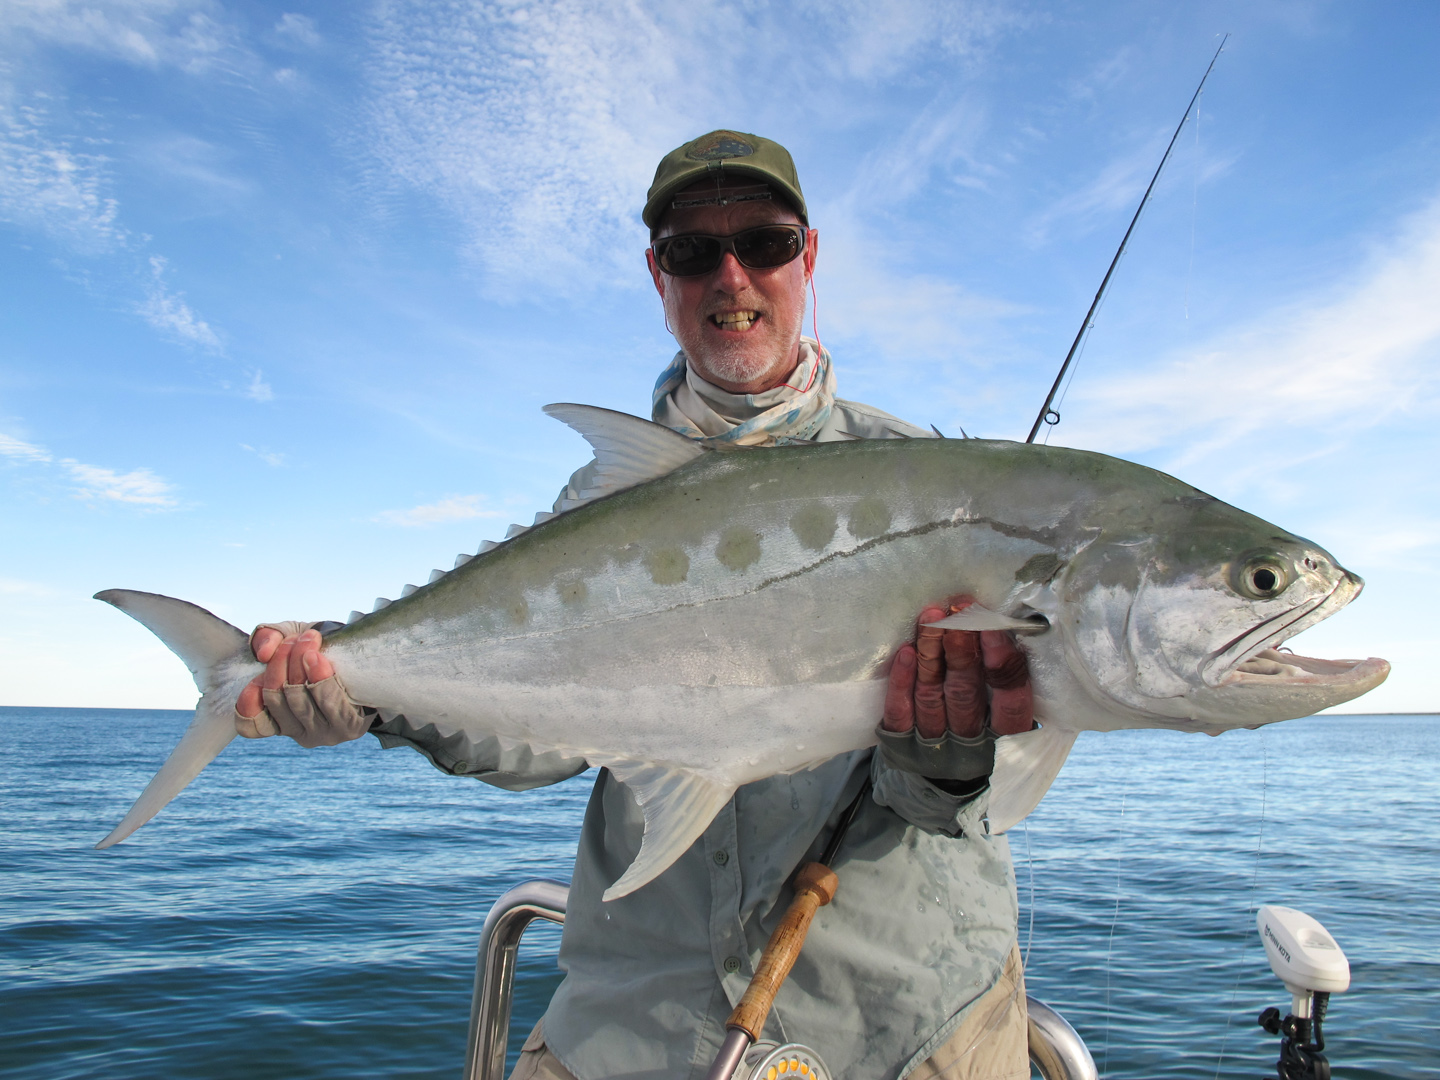 Giant Queenfish on fly, Saltwater fly fishing, learning to fly fish, catch and release